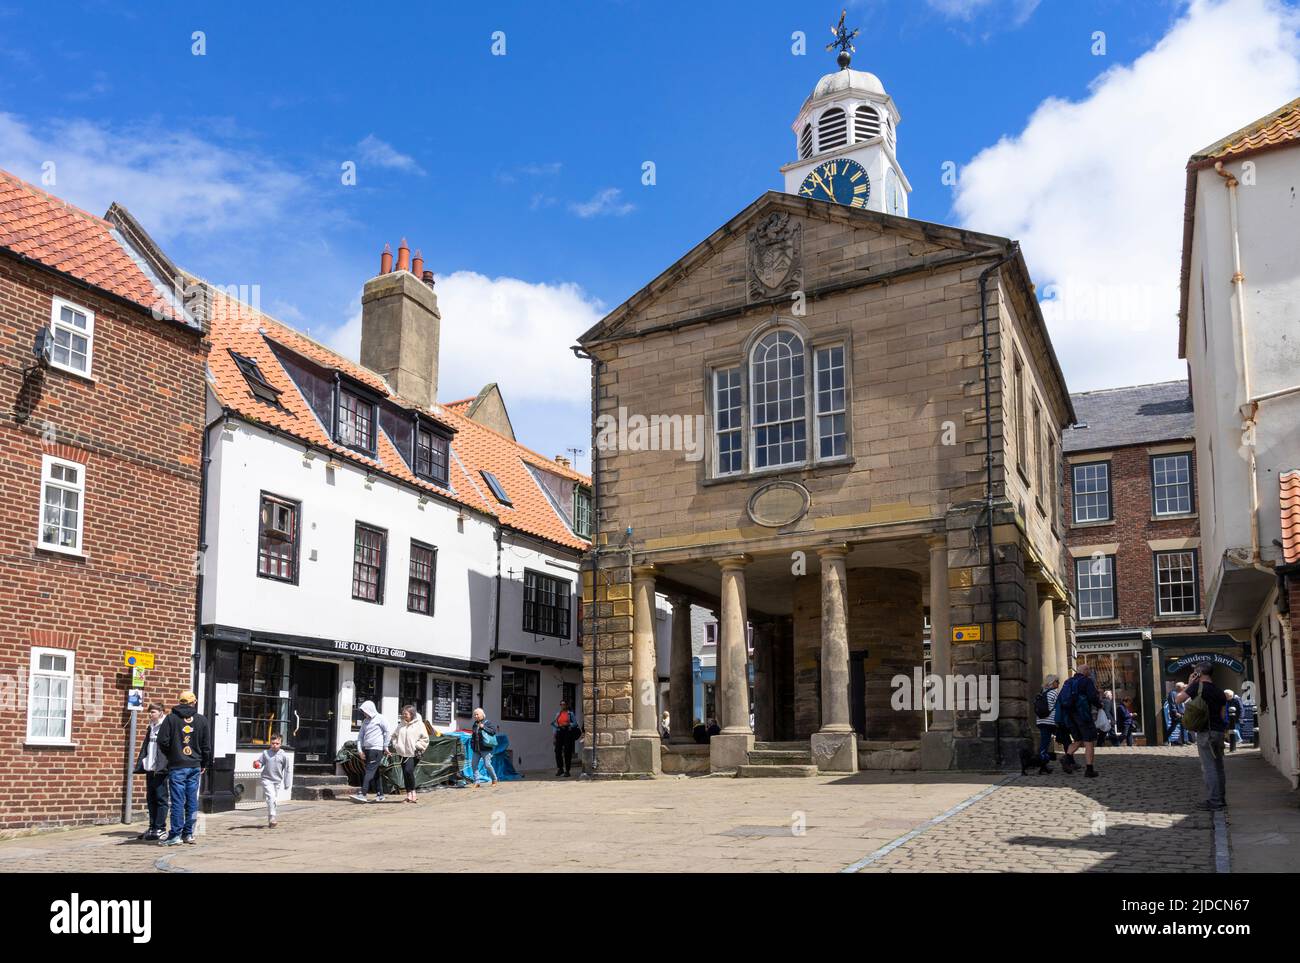 Whitby Yorkshire Whitby Old Town Market Square y Whitby Town Hall North yorkshire inglaterra gb europa Foto de stock